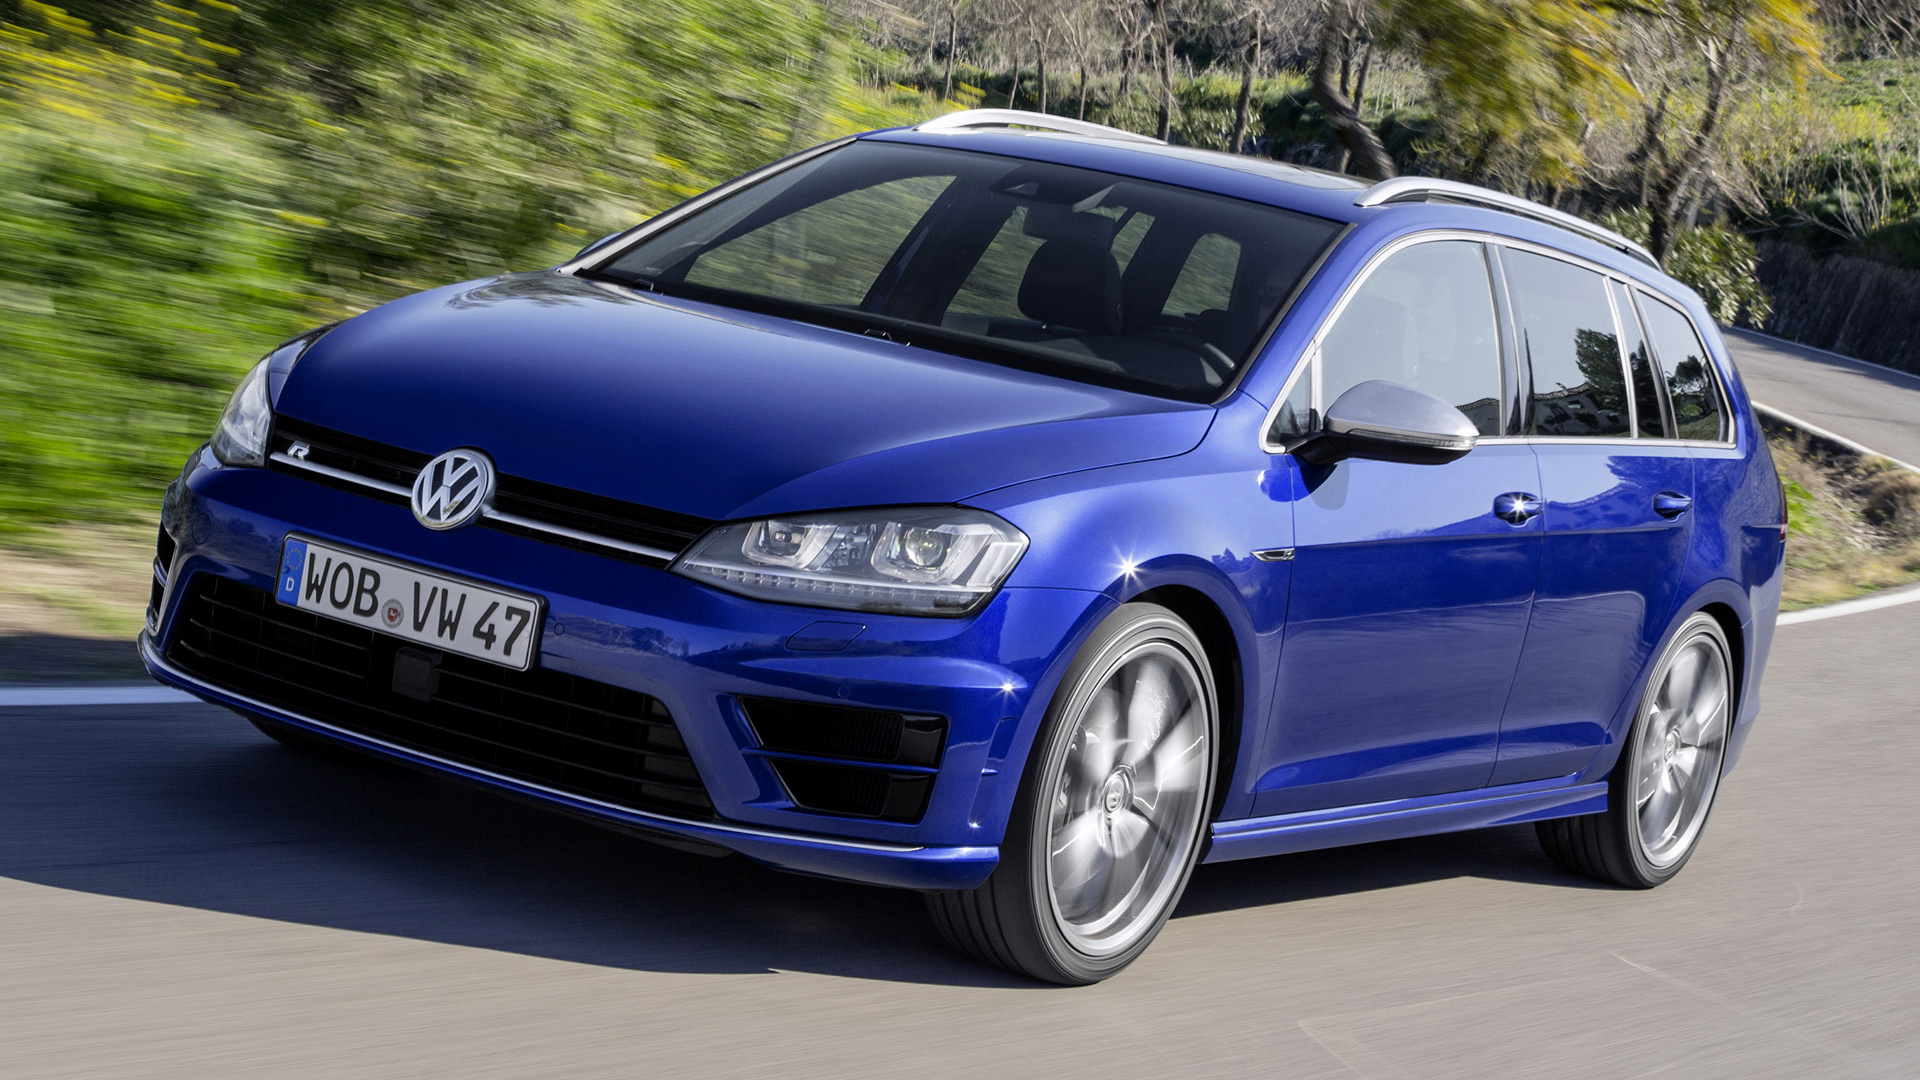 Volkswagen Golf R Variant 2015 Wallpapers and HD Images 1920x1080